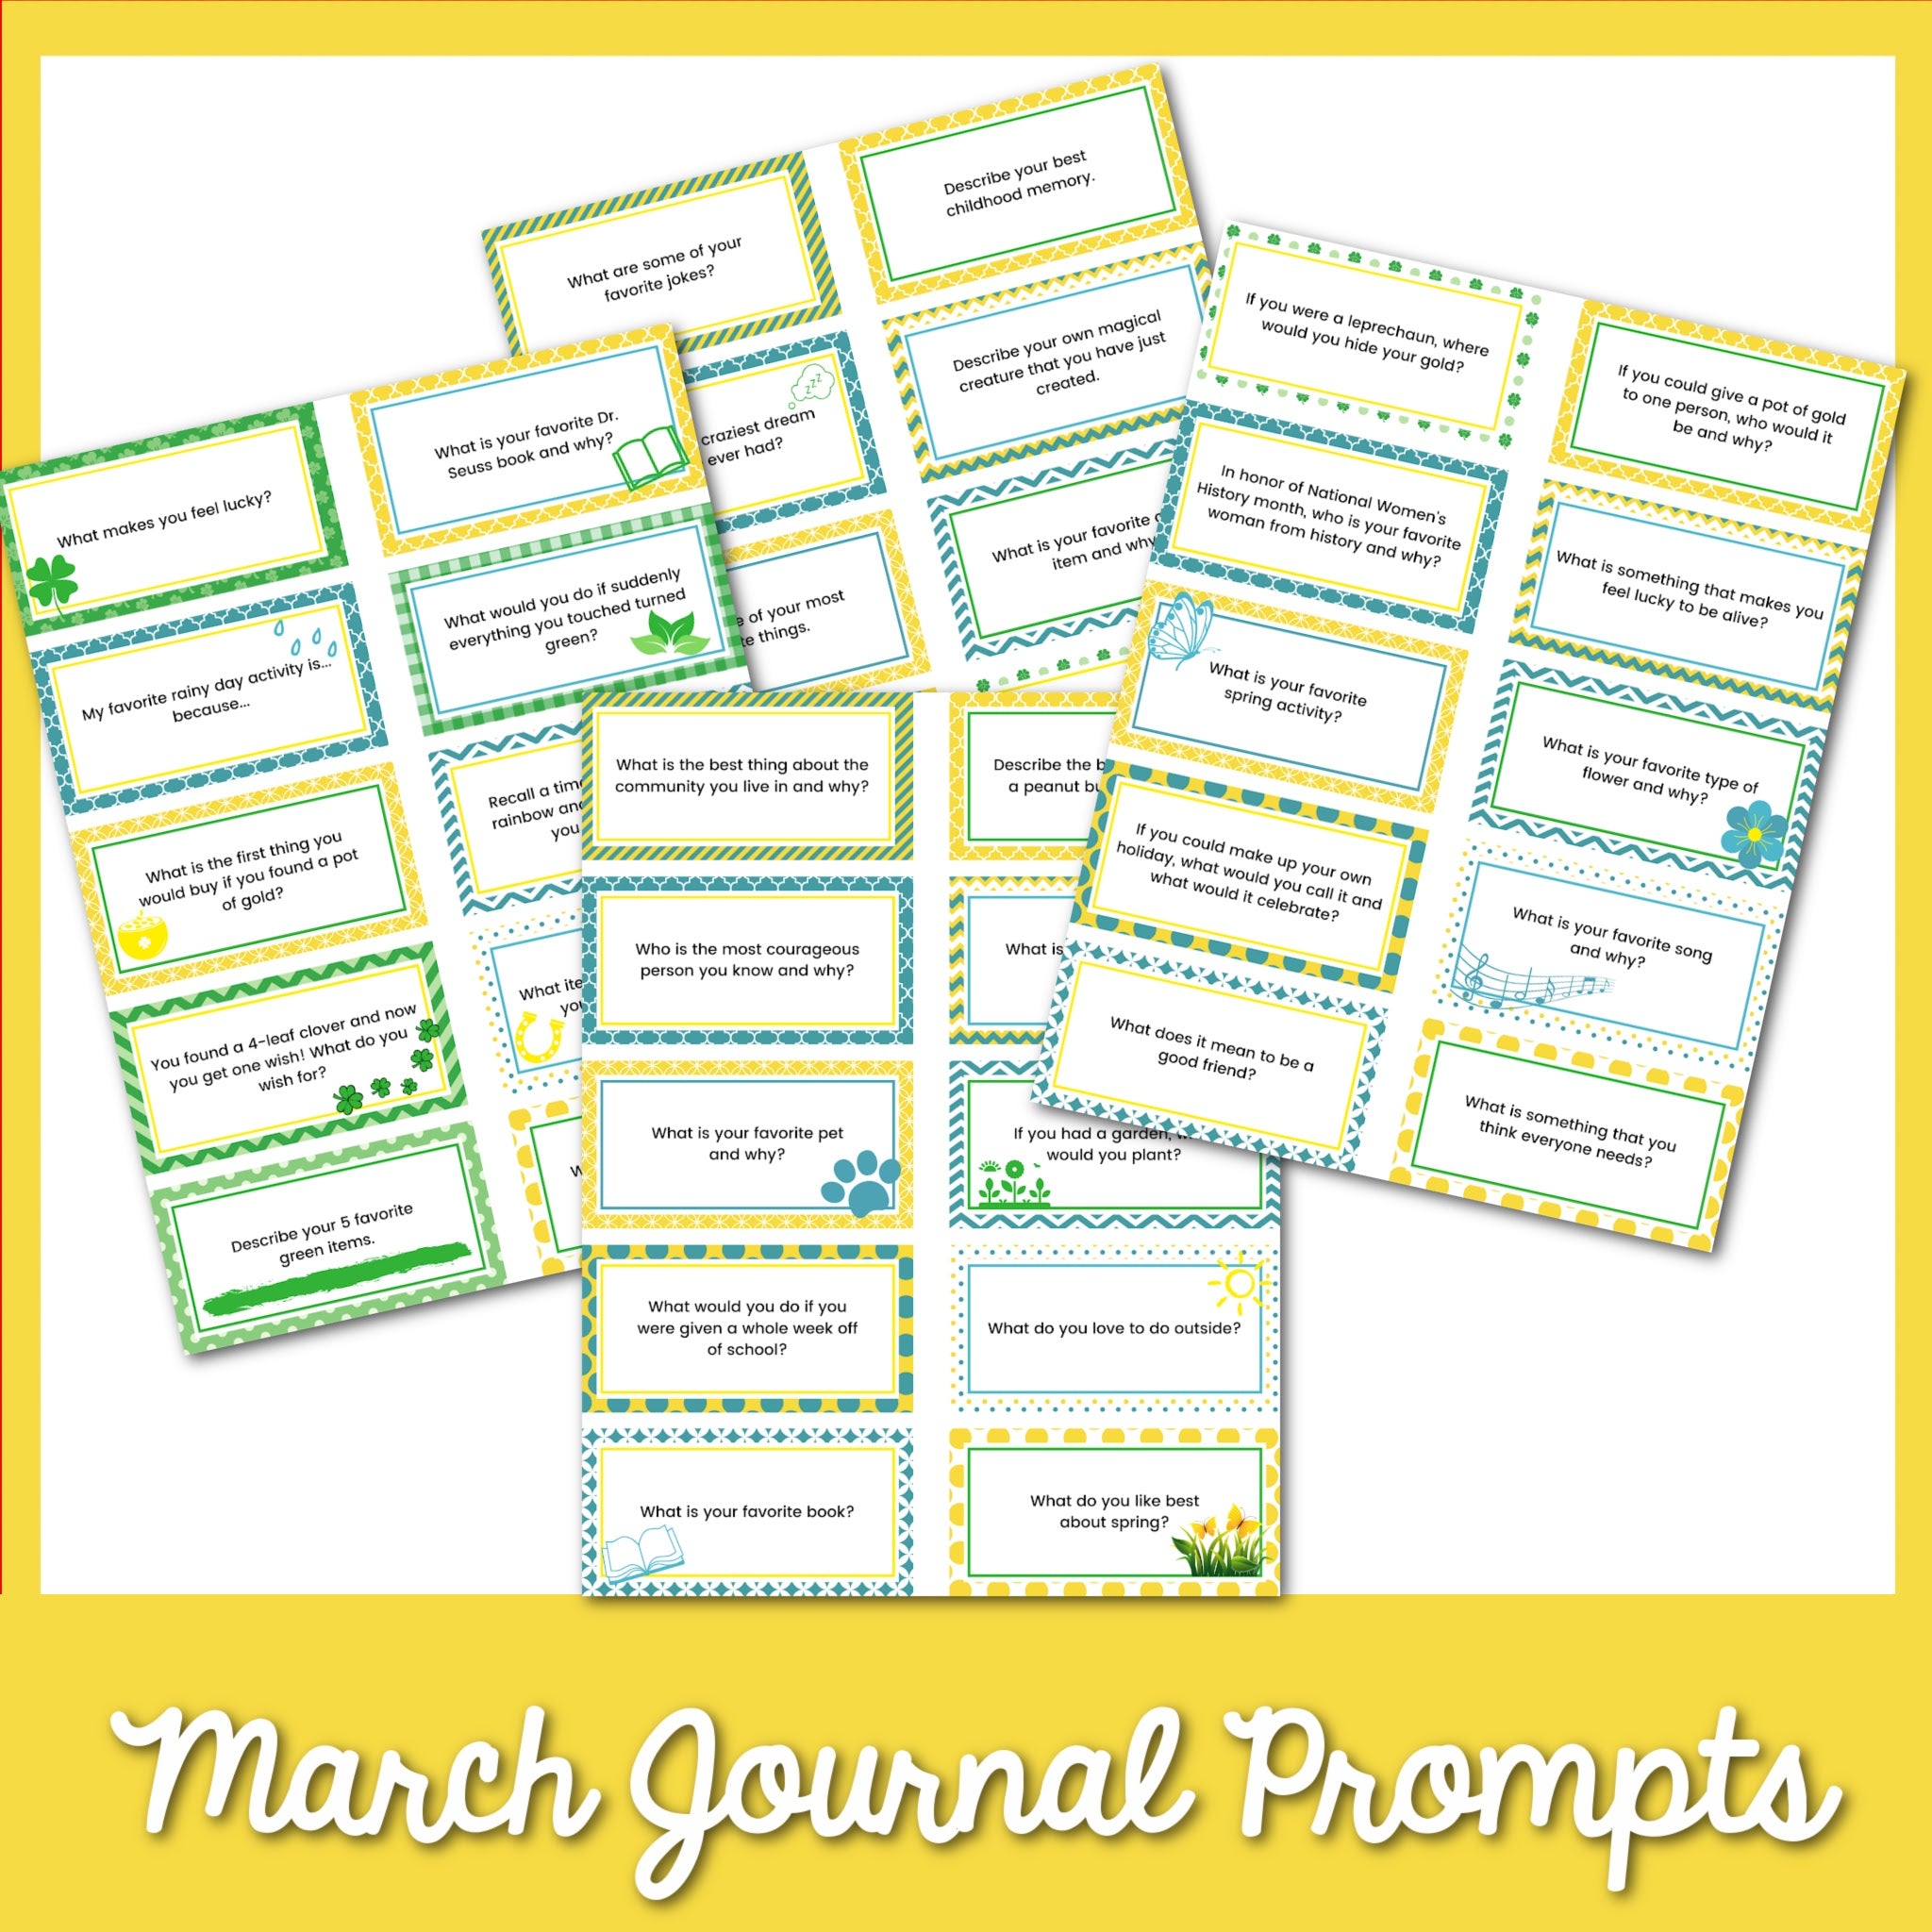 40 March Journal Prompts